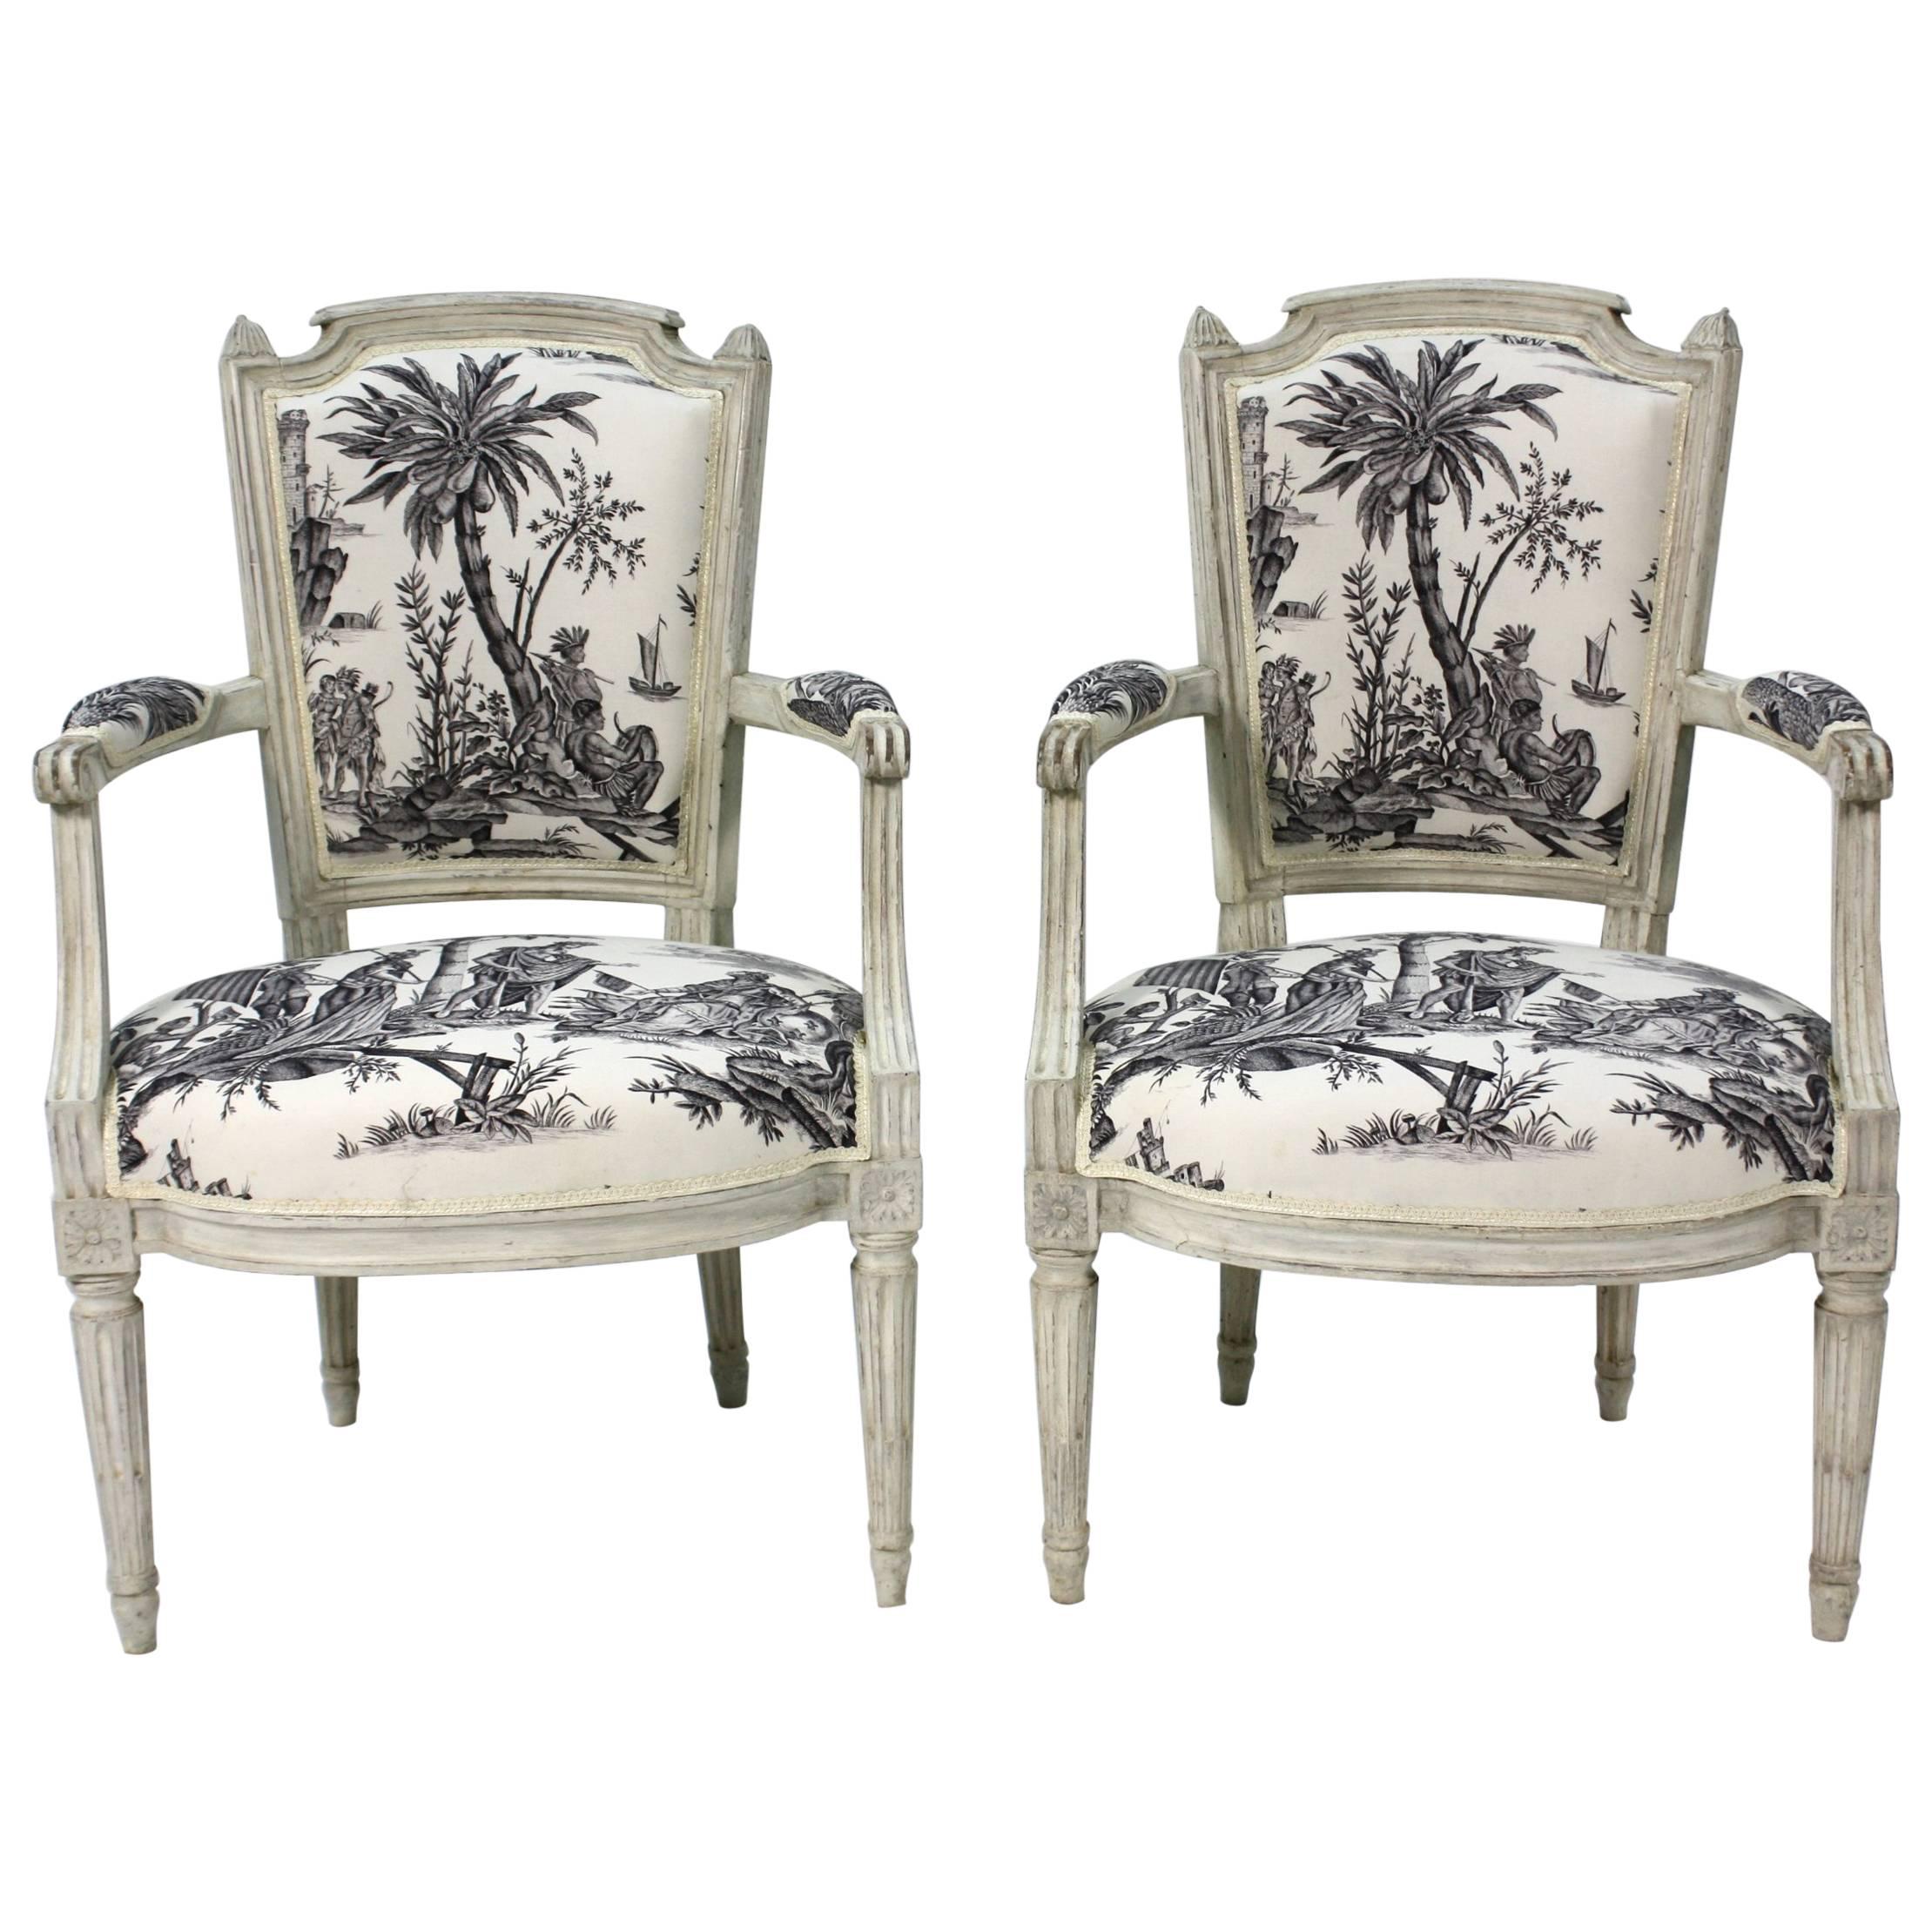 Pair of French Louis XVI Period Fauteuils or Armchairs For Sale